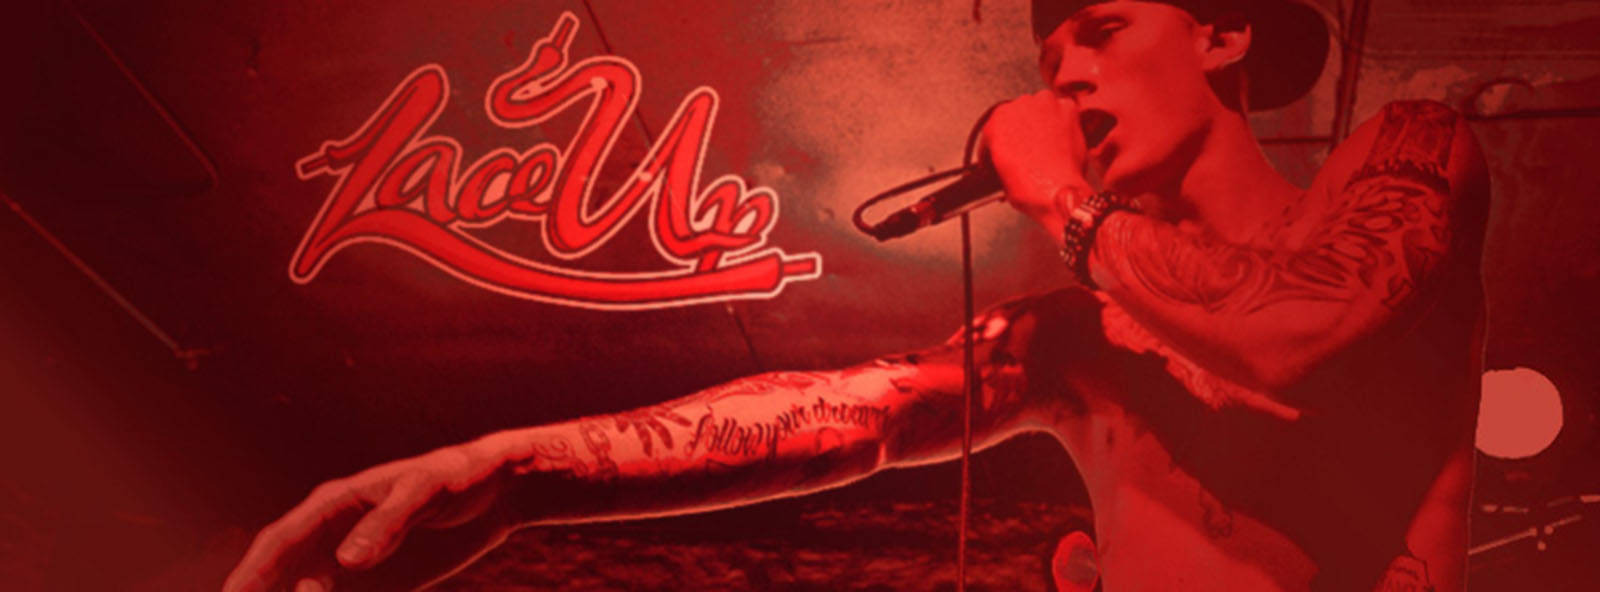 Red Aesthetic Lace Up Poster